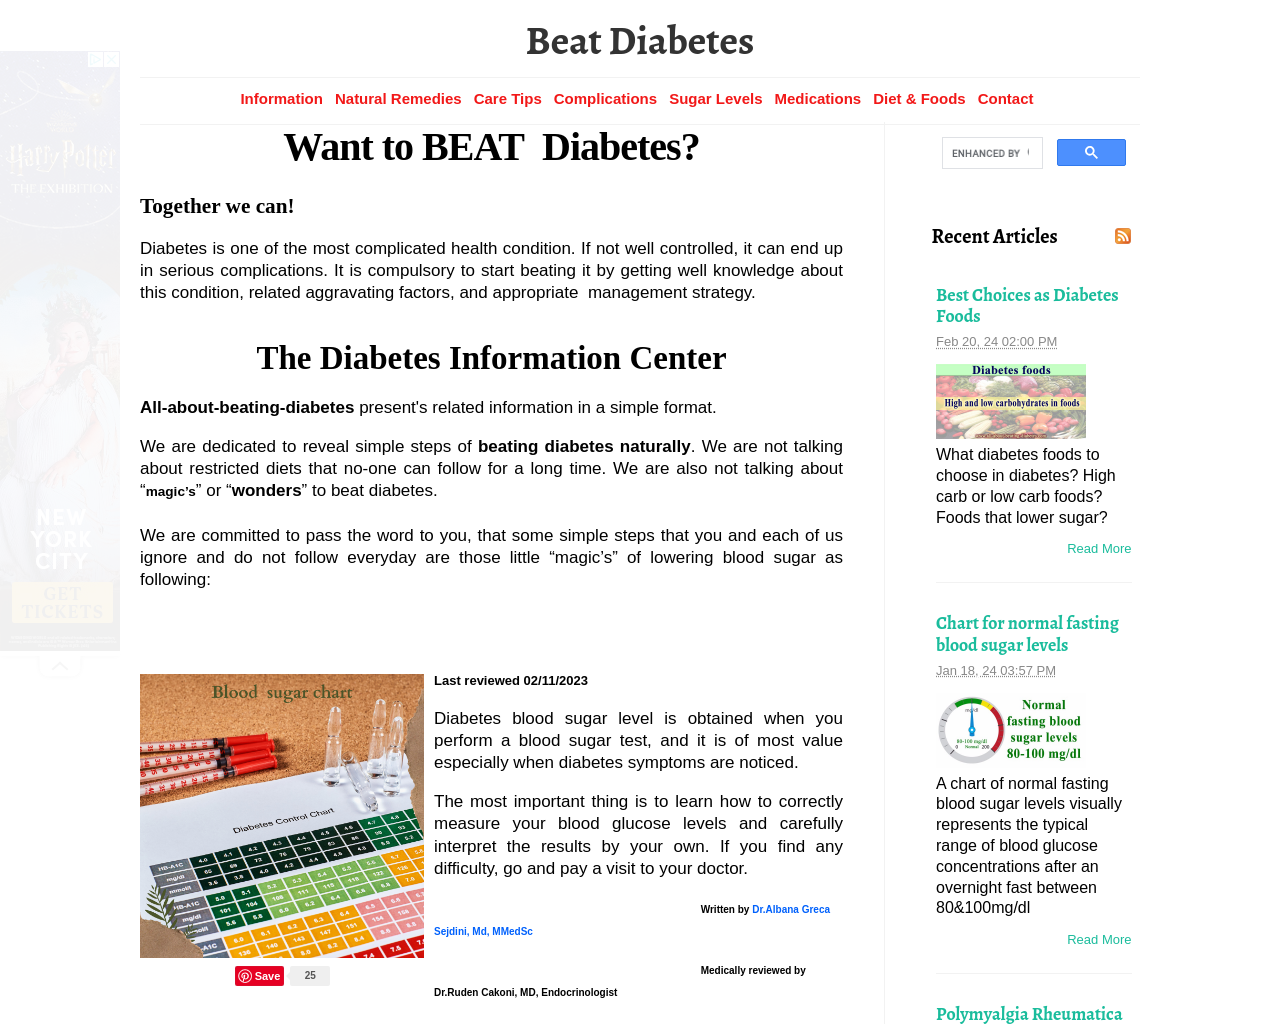 all-about-beating-diabetes.com